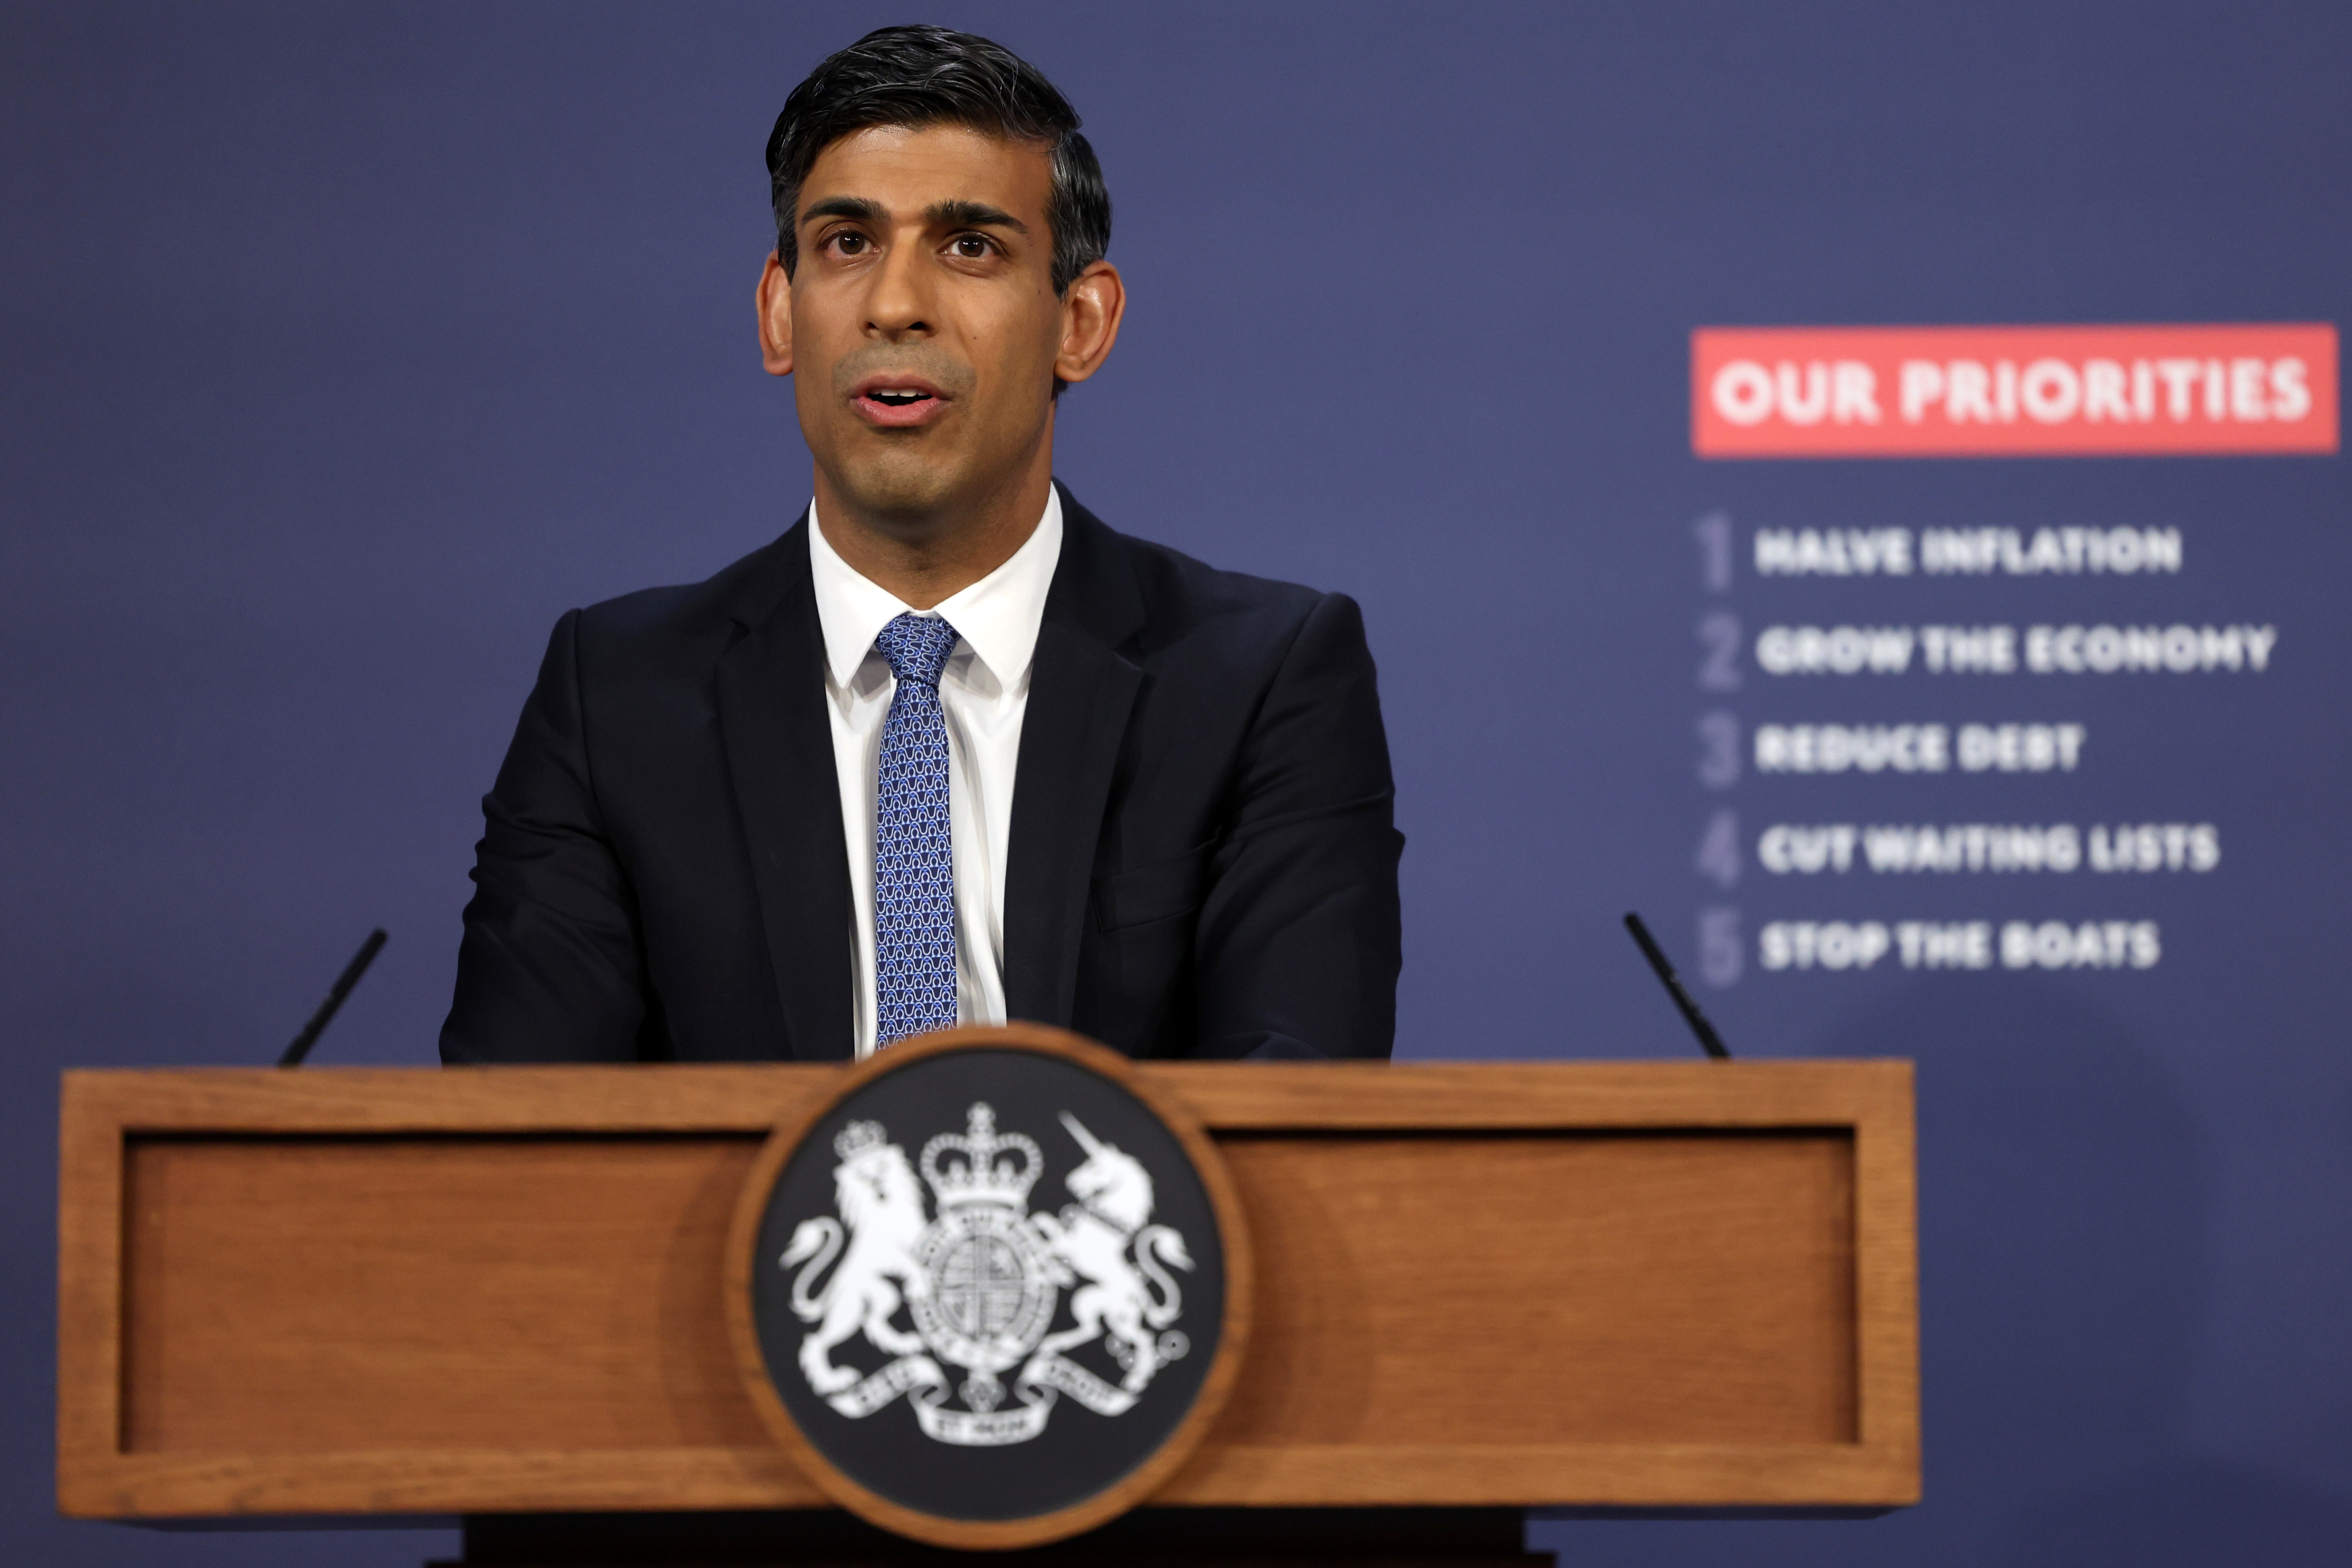 British Prime Minister Rishi Sunak’s government has been criticised for its response to the ‘threat’ posed by China. Photo: dpa